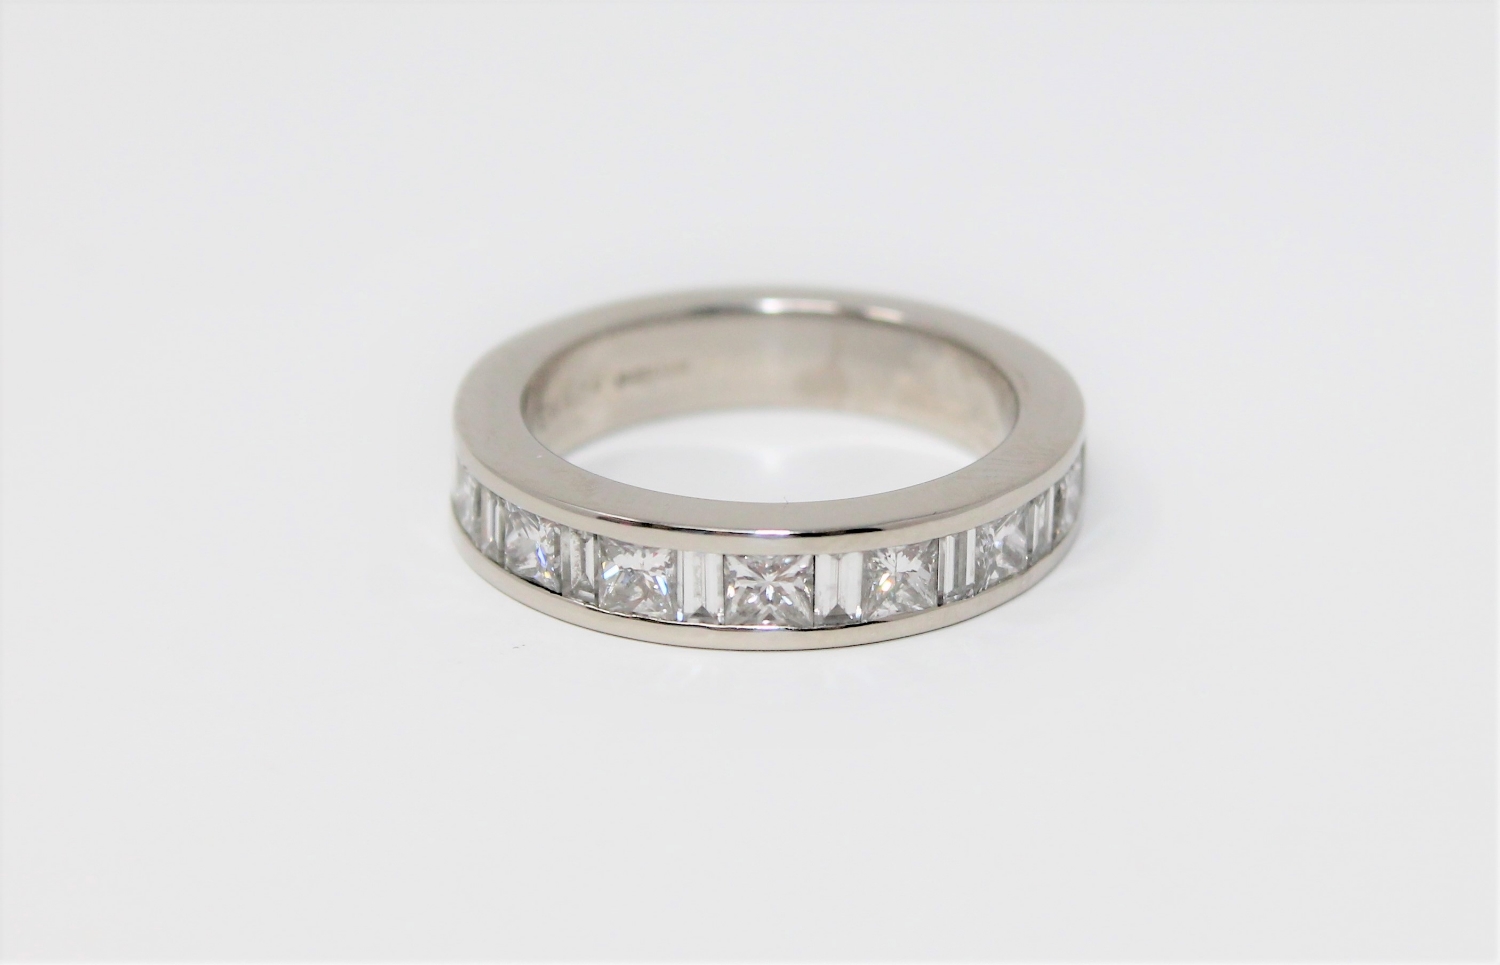 A fine quality platinum and diamond half-eternity ring set with princess and baguette-cut stones,